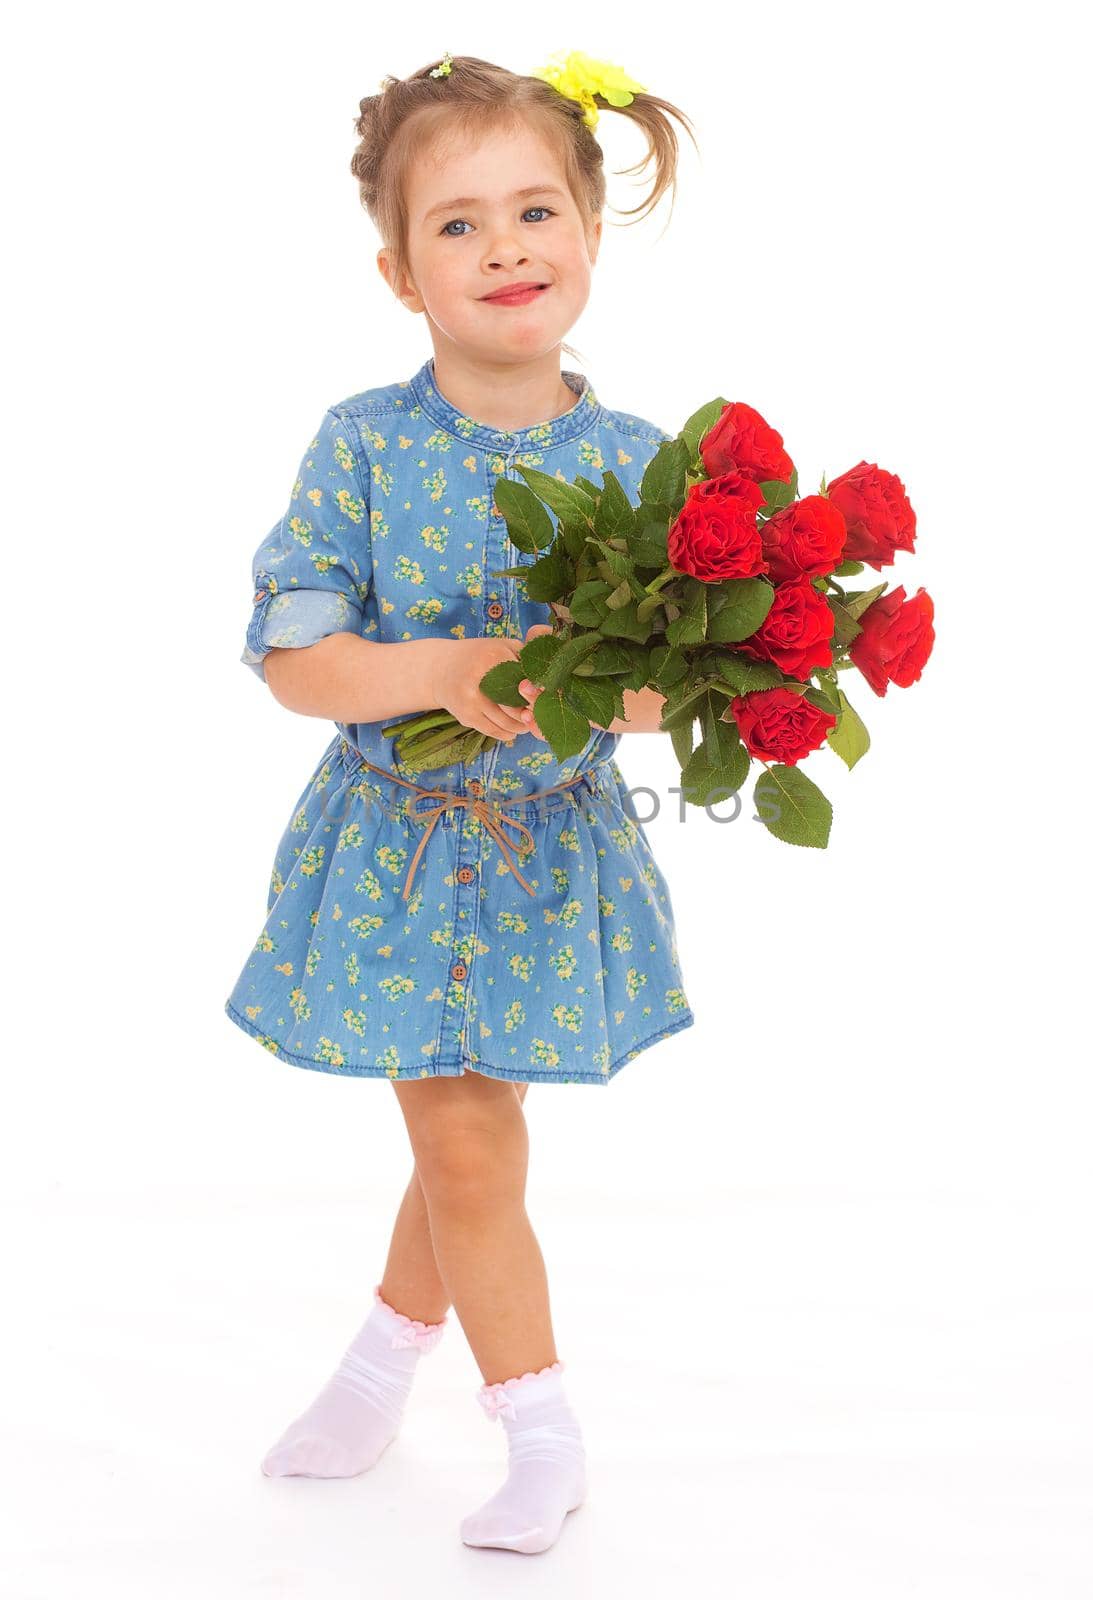 Little girl in a blue dress buttoned holding a bouquet of roses